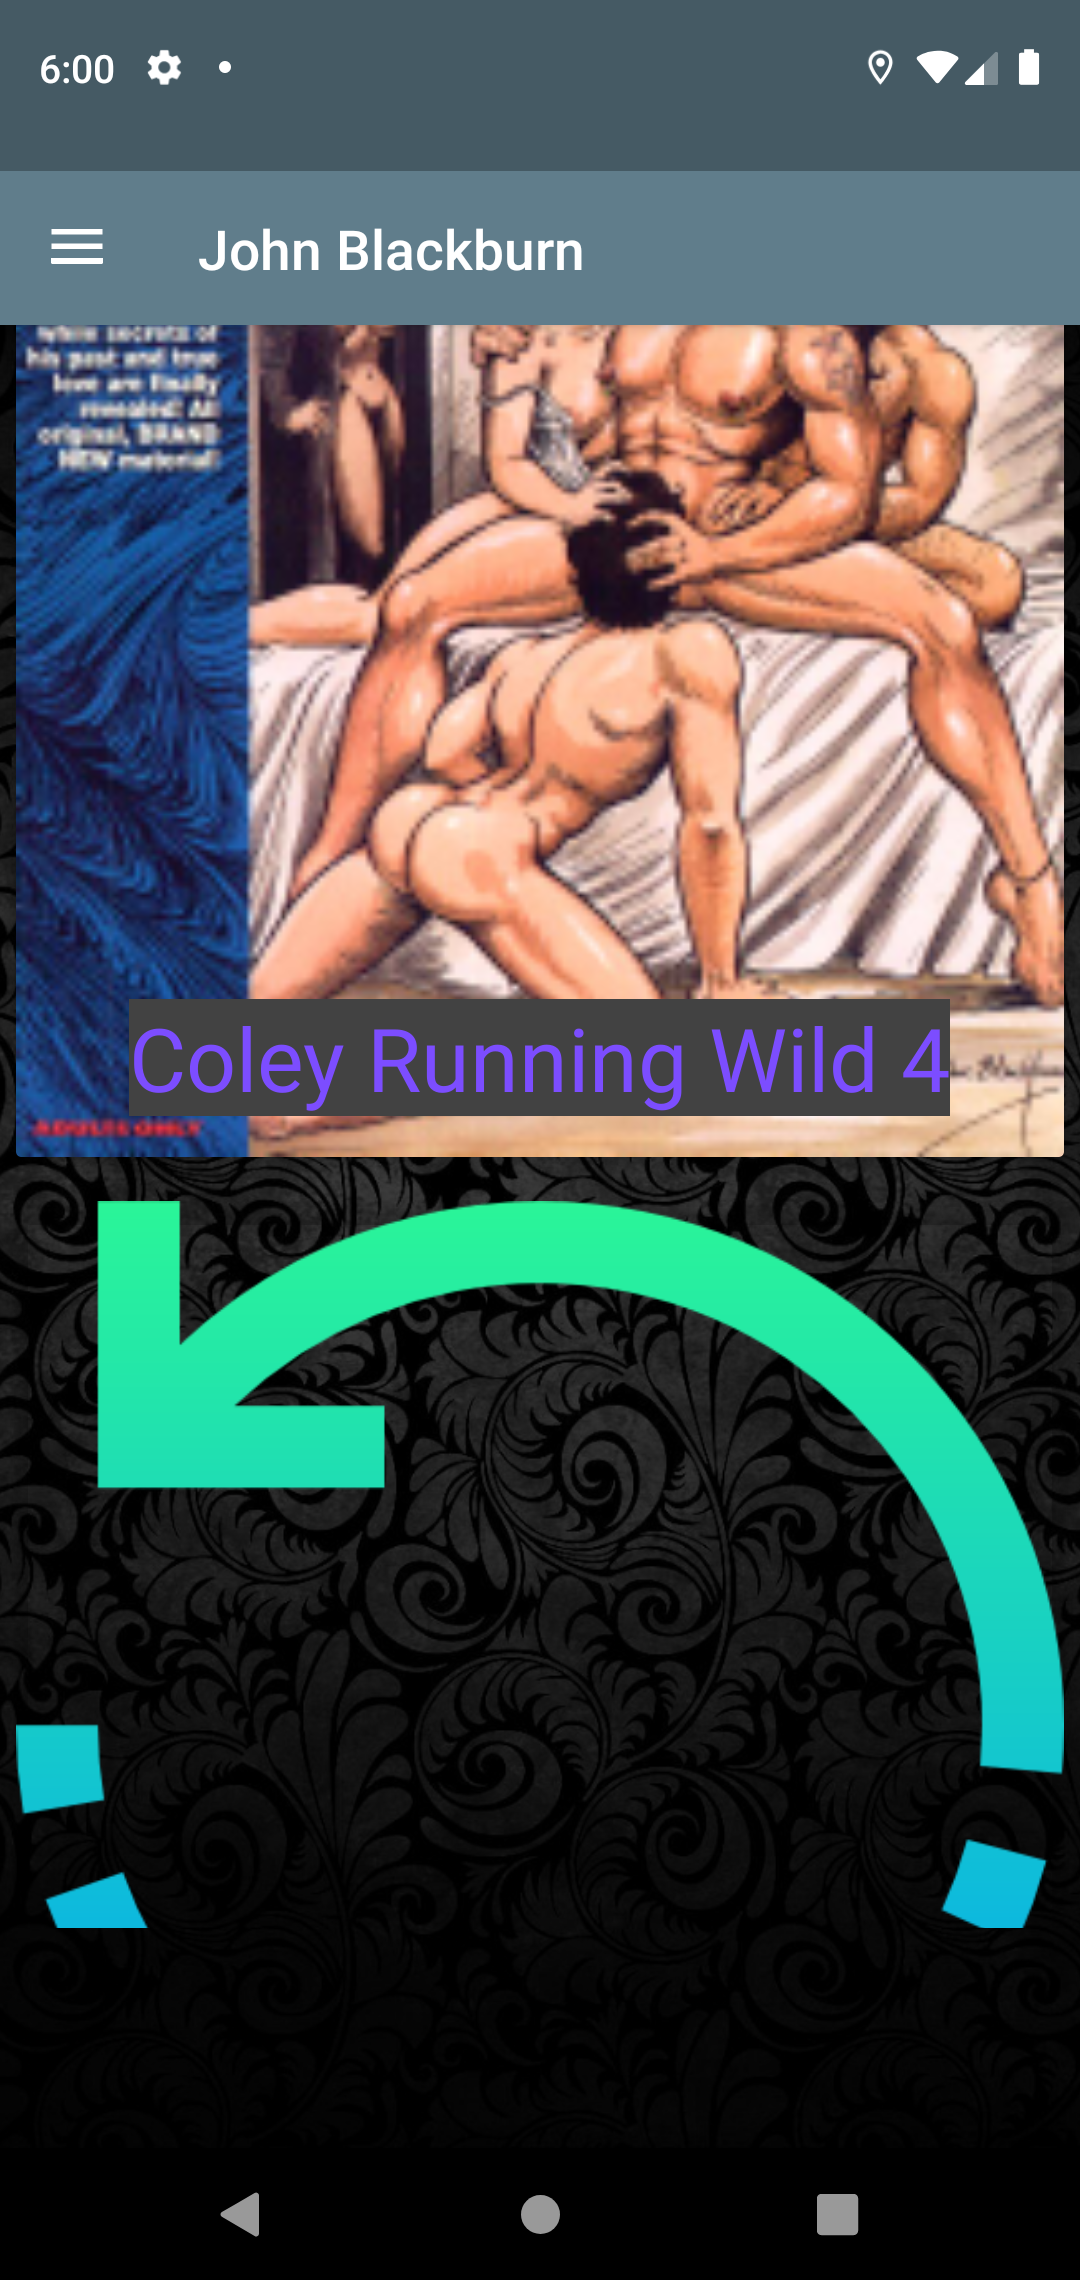 Coley Running Wild porn,puzzle,comic,blackburn,hentai,panties,app,watching,mythras,picture,mainichi,daily,for,hot,manga,apps,yaoi,and,comics,gallery,anoko,android,gay,image,wallpapers,lair,john,bondage,pics